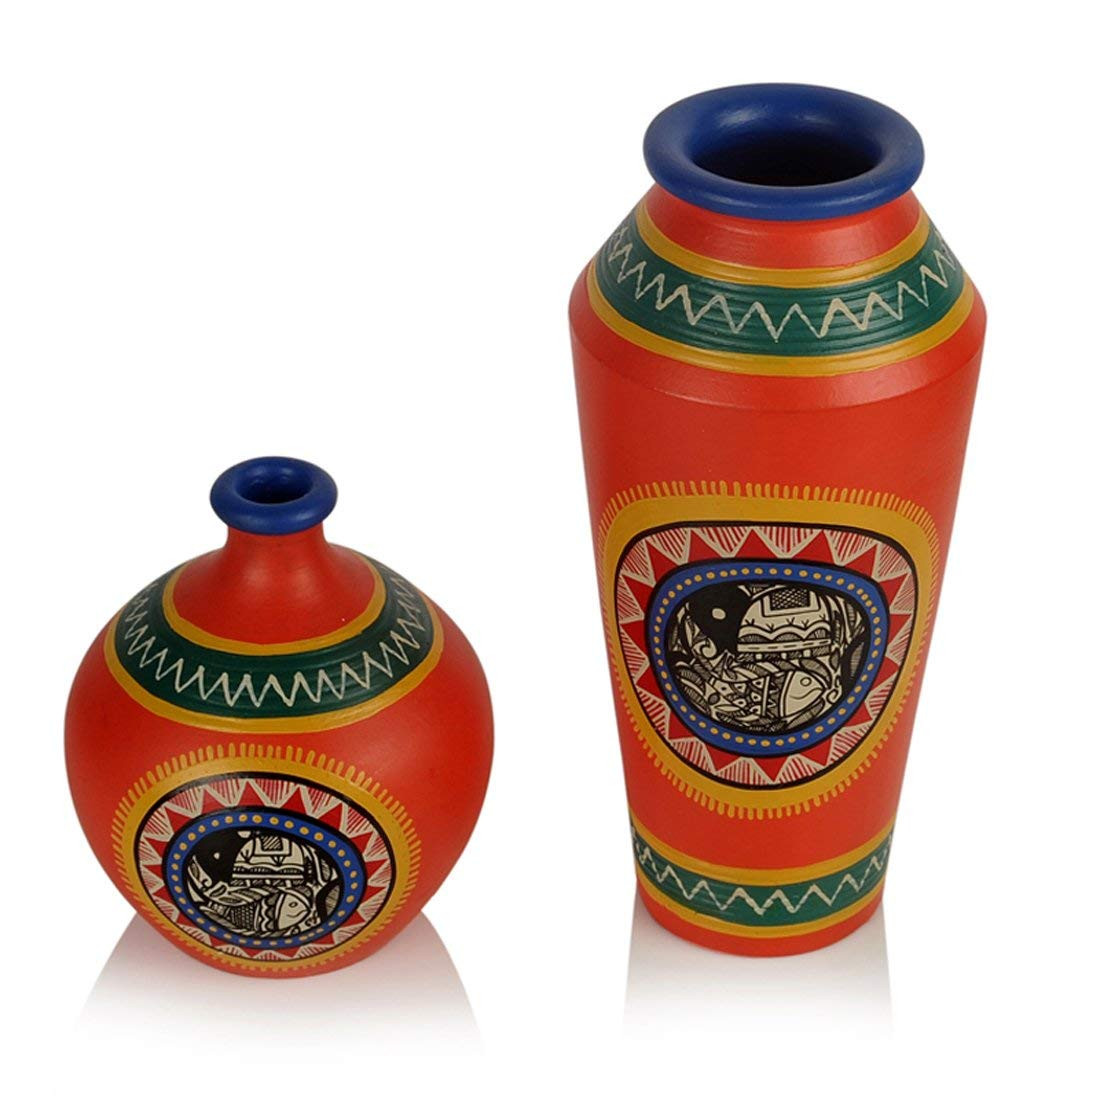 red ceramic vases and urns of buy exclusivelane terracotta handpainted bright orange madhubani inside buy exclusivelane terracotta handpainted bright orange madhubani vases set flower pots home decorative pieces gift item online at low prices in india